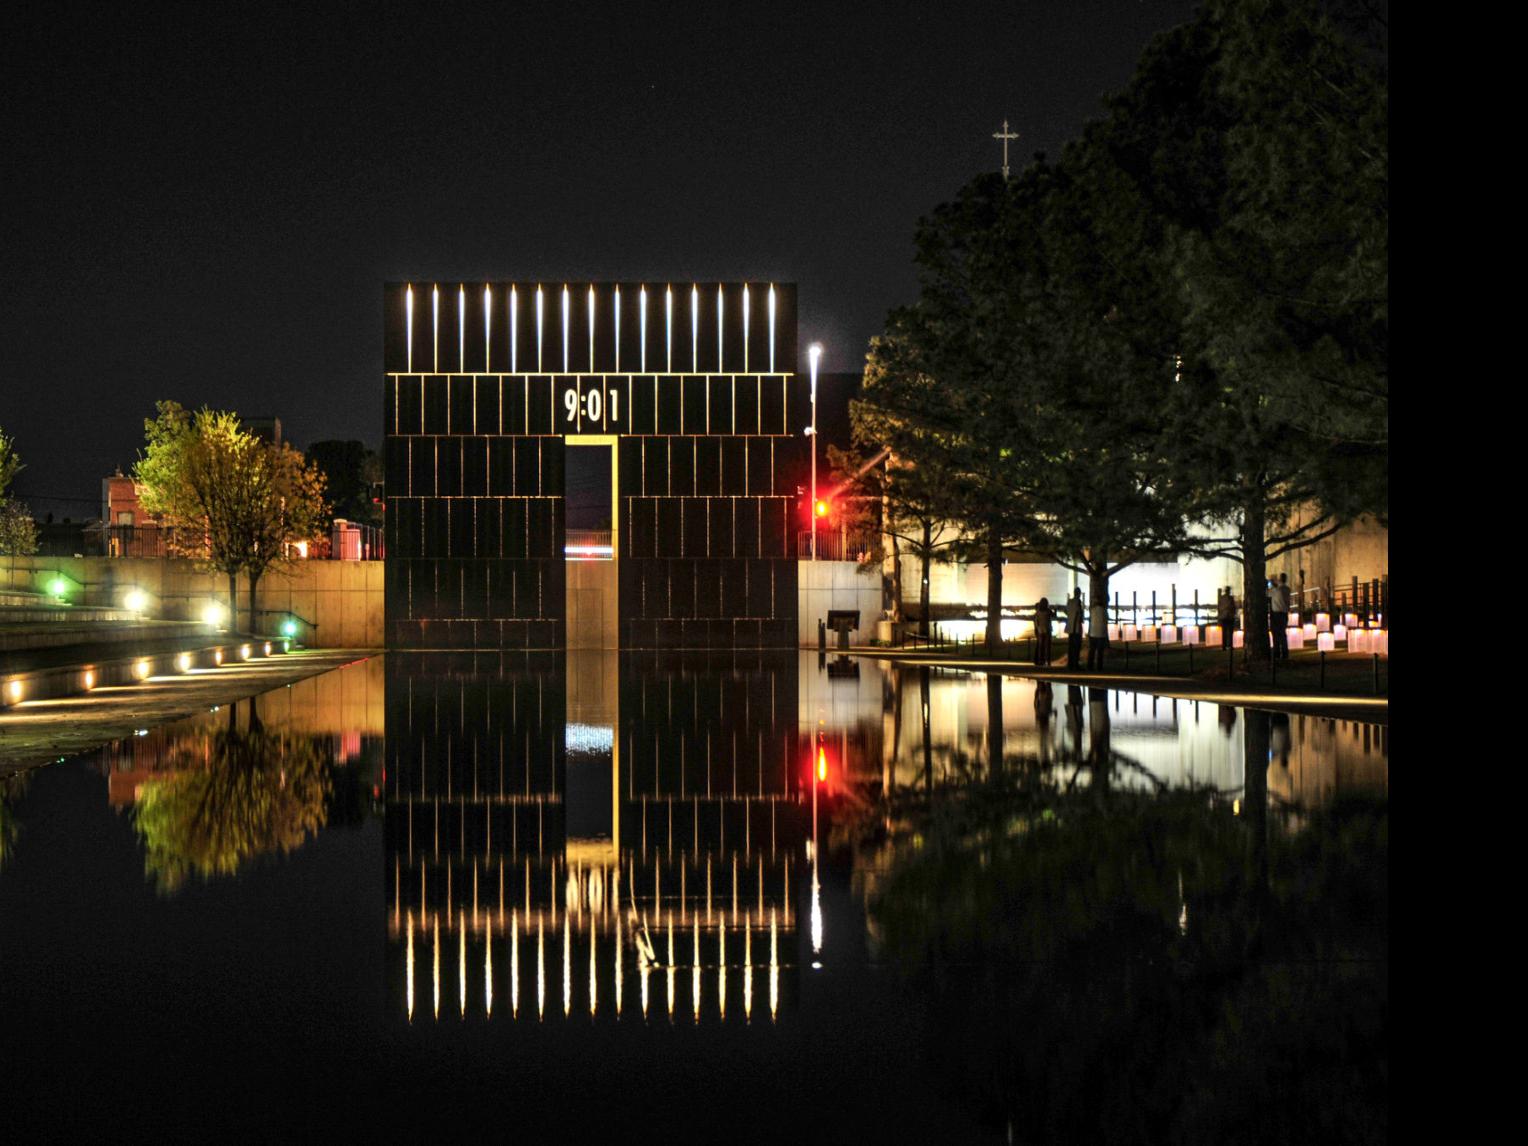 Thunder to underwrite admission to Oklahoma City National Memorial & Museum  once a month in 2020